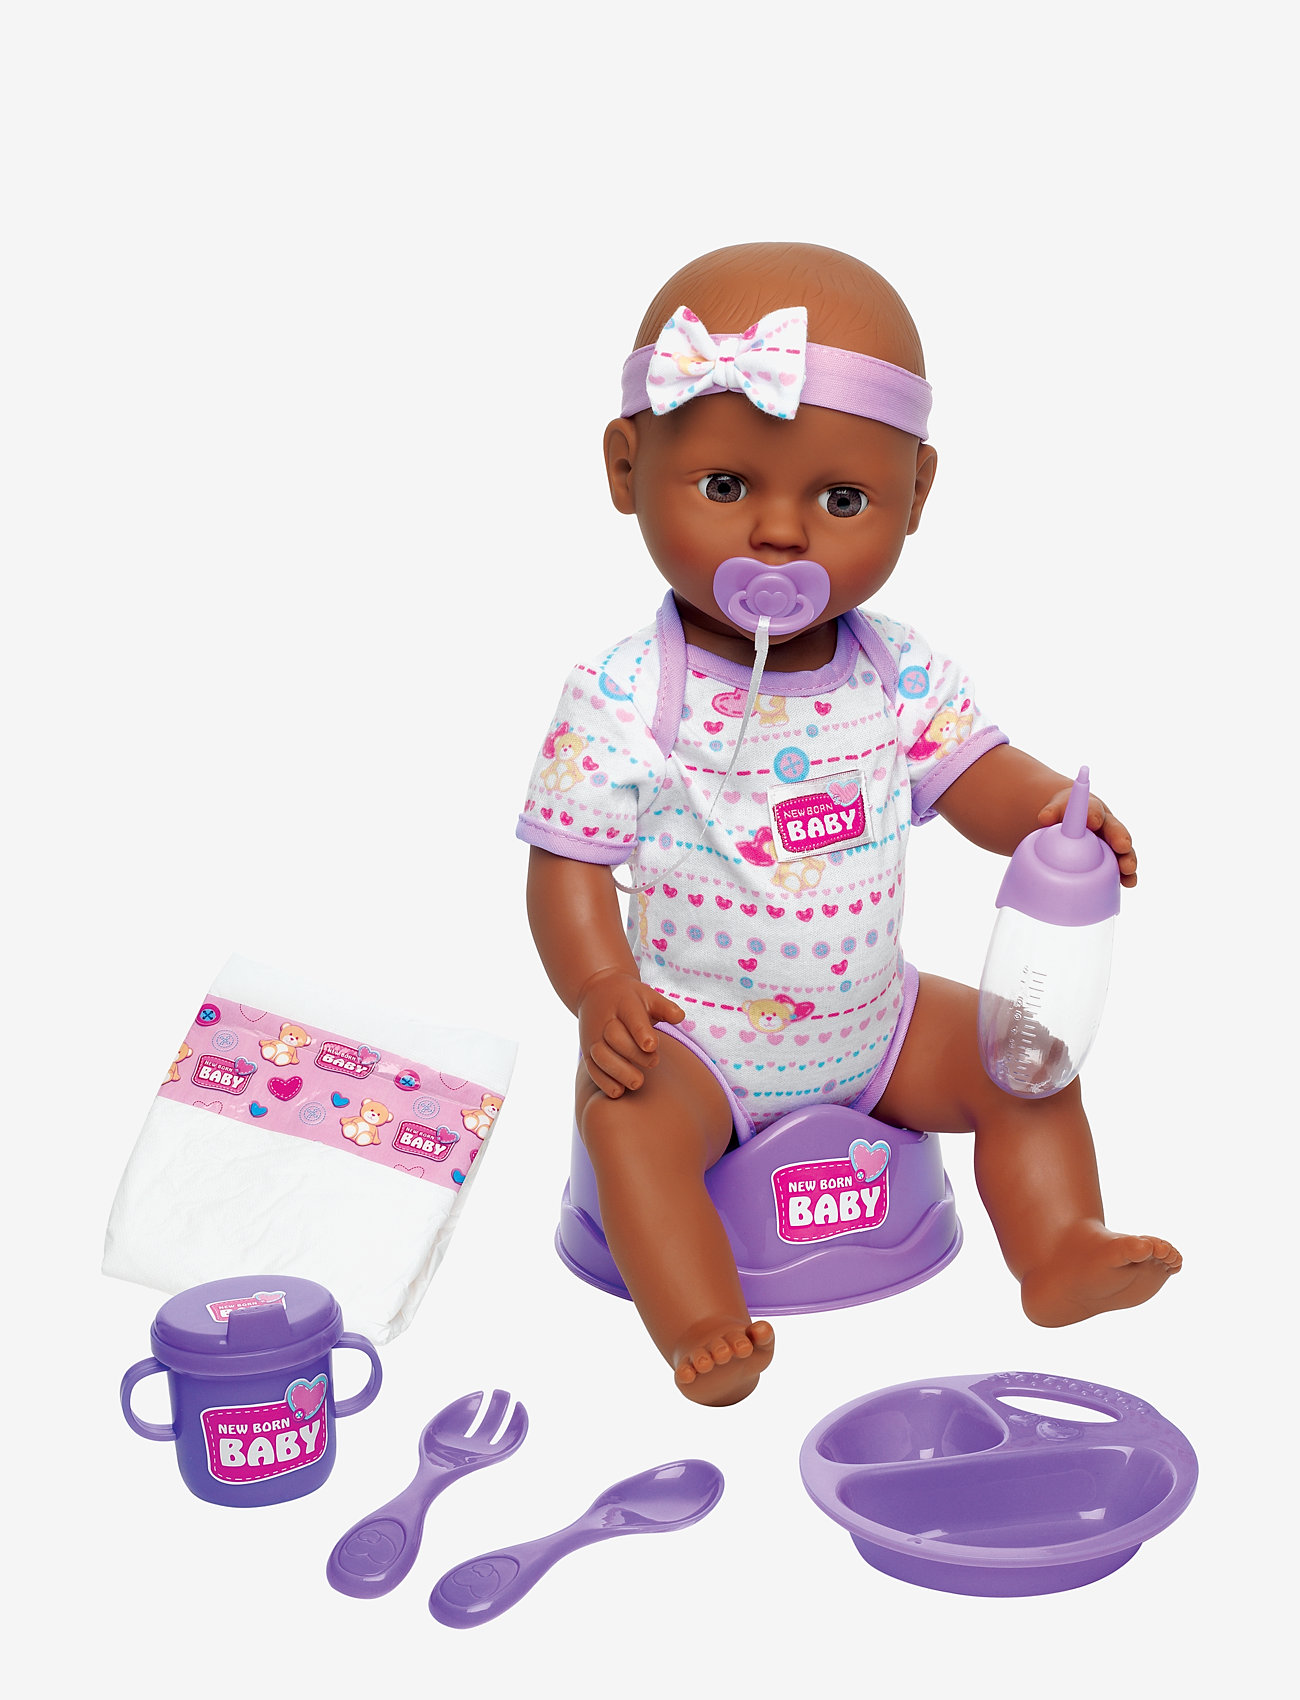 Simba Toys - NBB Baby Doll, Violet Accessories - nuket - brown - 0